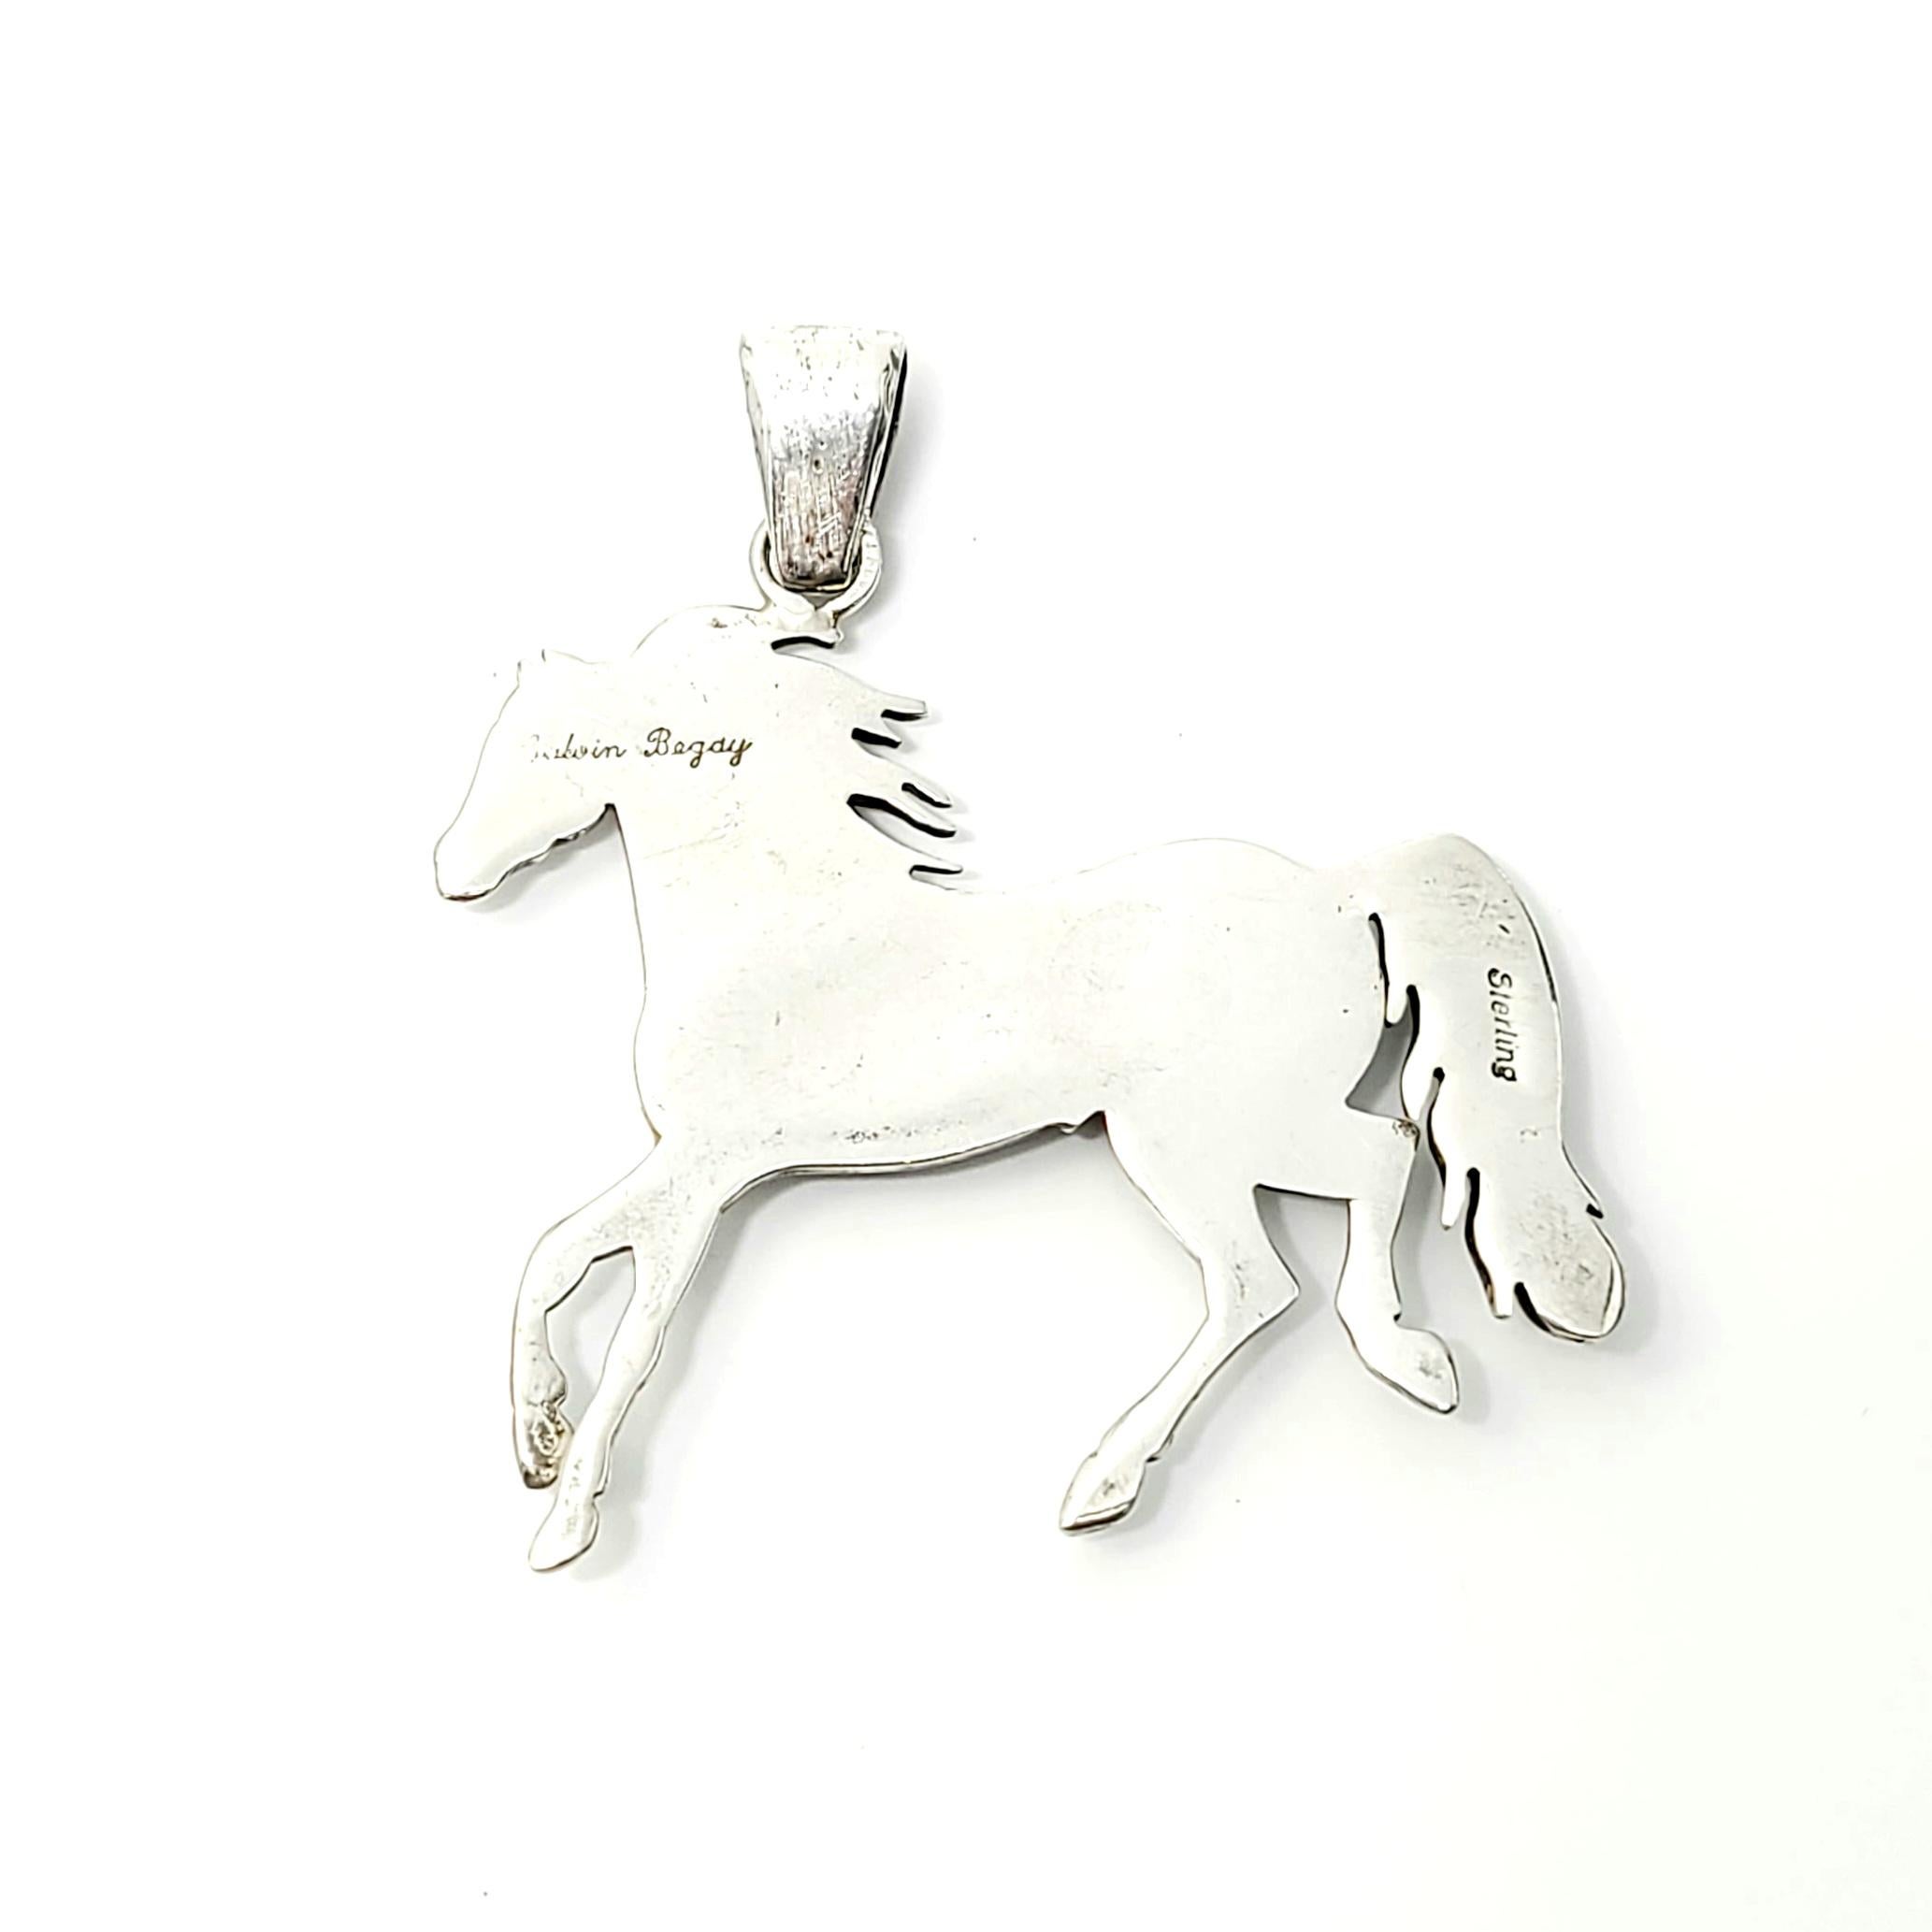 Sterling silver and inlay mosaic horse pendant by Native American artisan Calvin Begay.

Calvin Begay has been a jewelry designer and master craftsman for 20+ years, using traditional Navajo inlay techniques that reflect his heritage. His pieces are